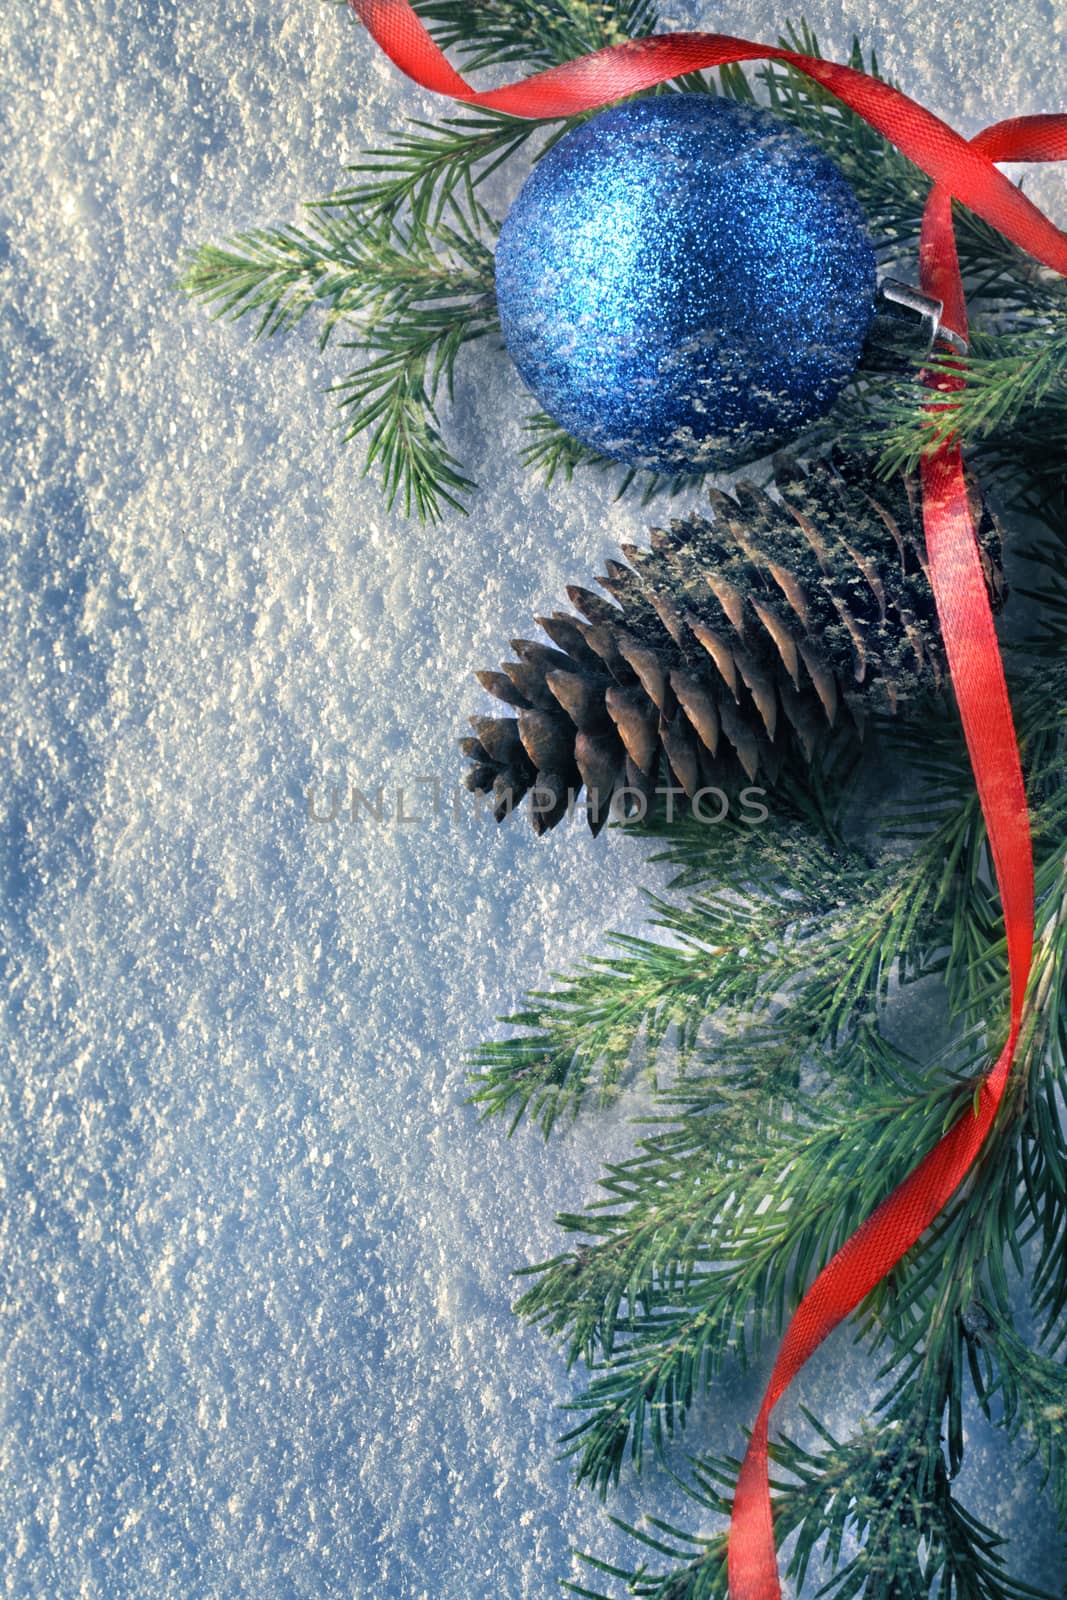 Background with fir and cone